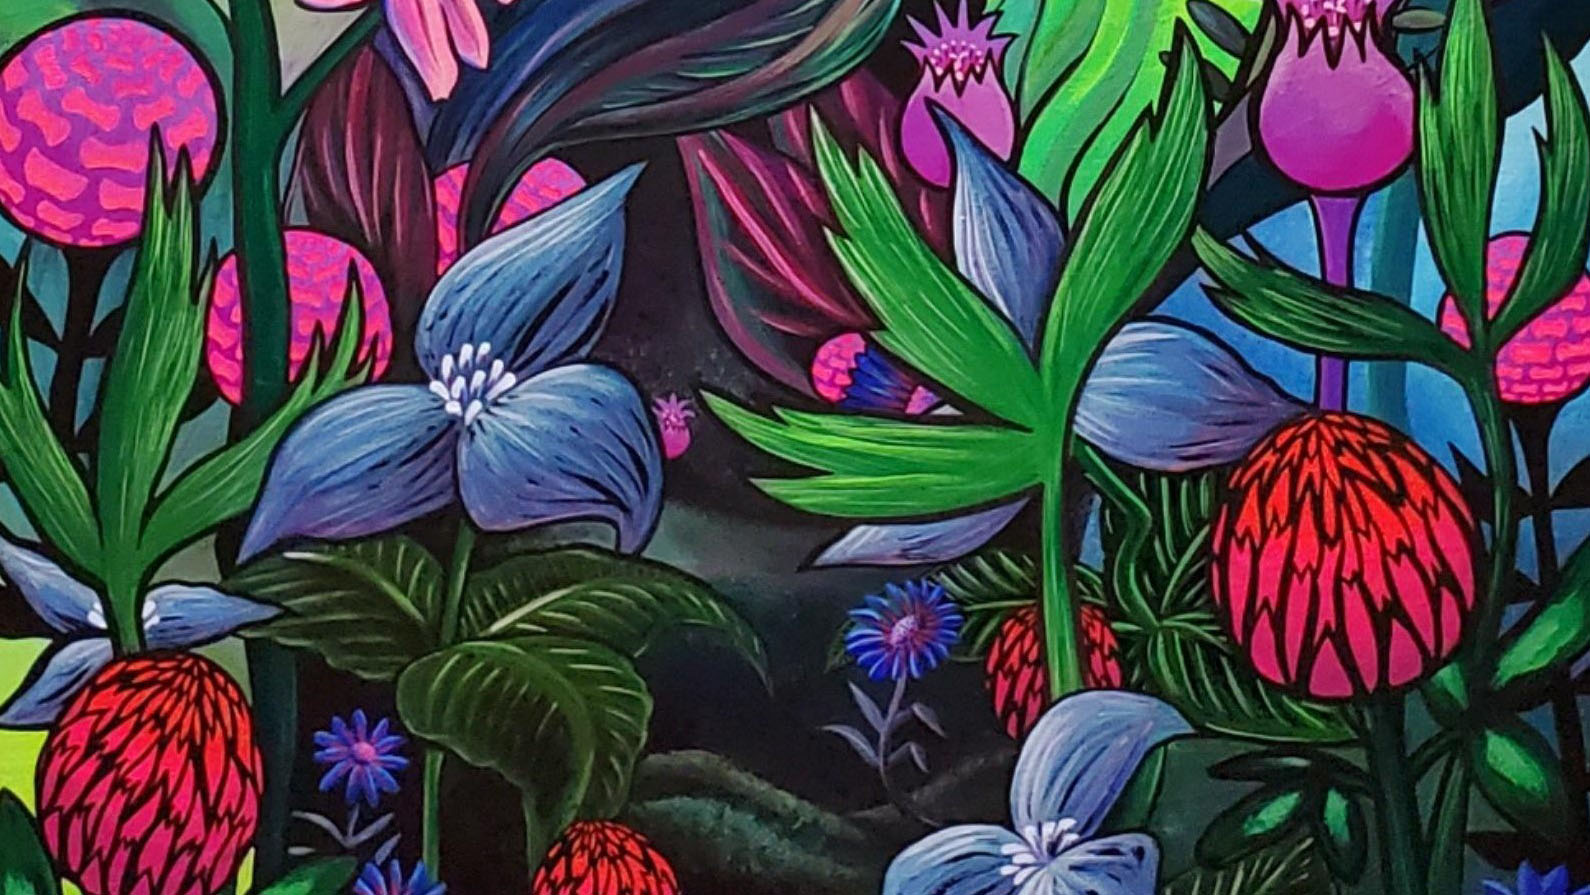 a painting of blue trillium, red clover, and purple bee balm with lush greenery in deeply saturated colors